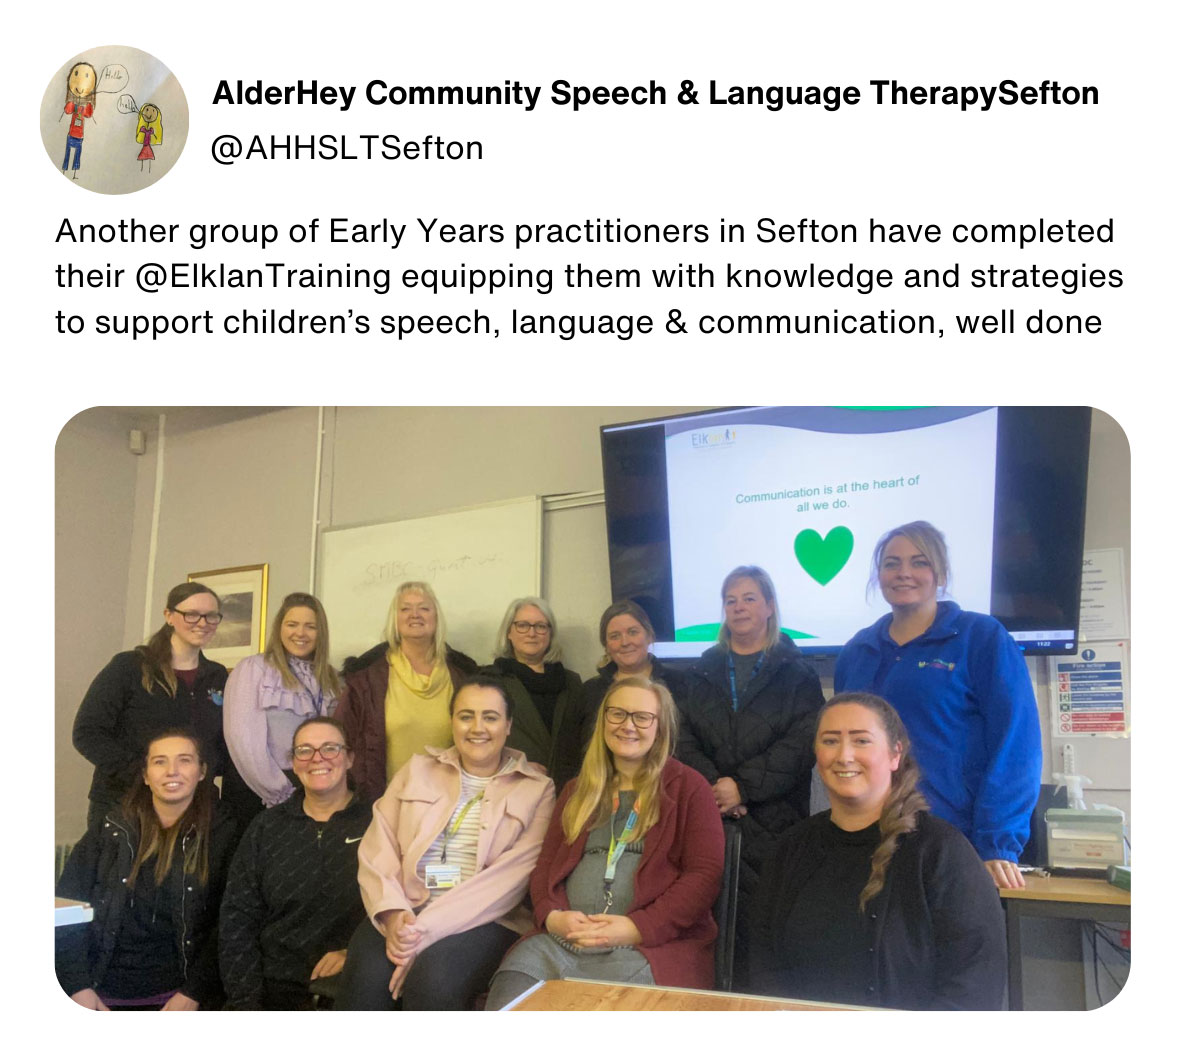 AlderHey Community Speech & Language TherapySefton: Another group of Early Years practitioners in Sefton have completed their Elklan Training equipping them with knowledge and strategies to support children's speech, language & communication, well done